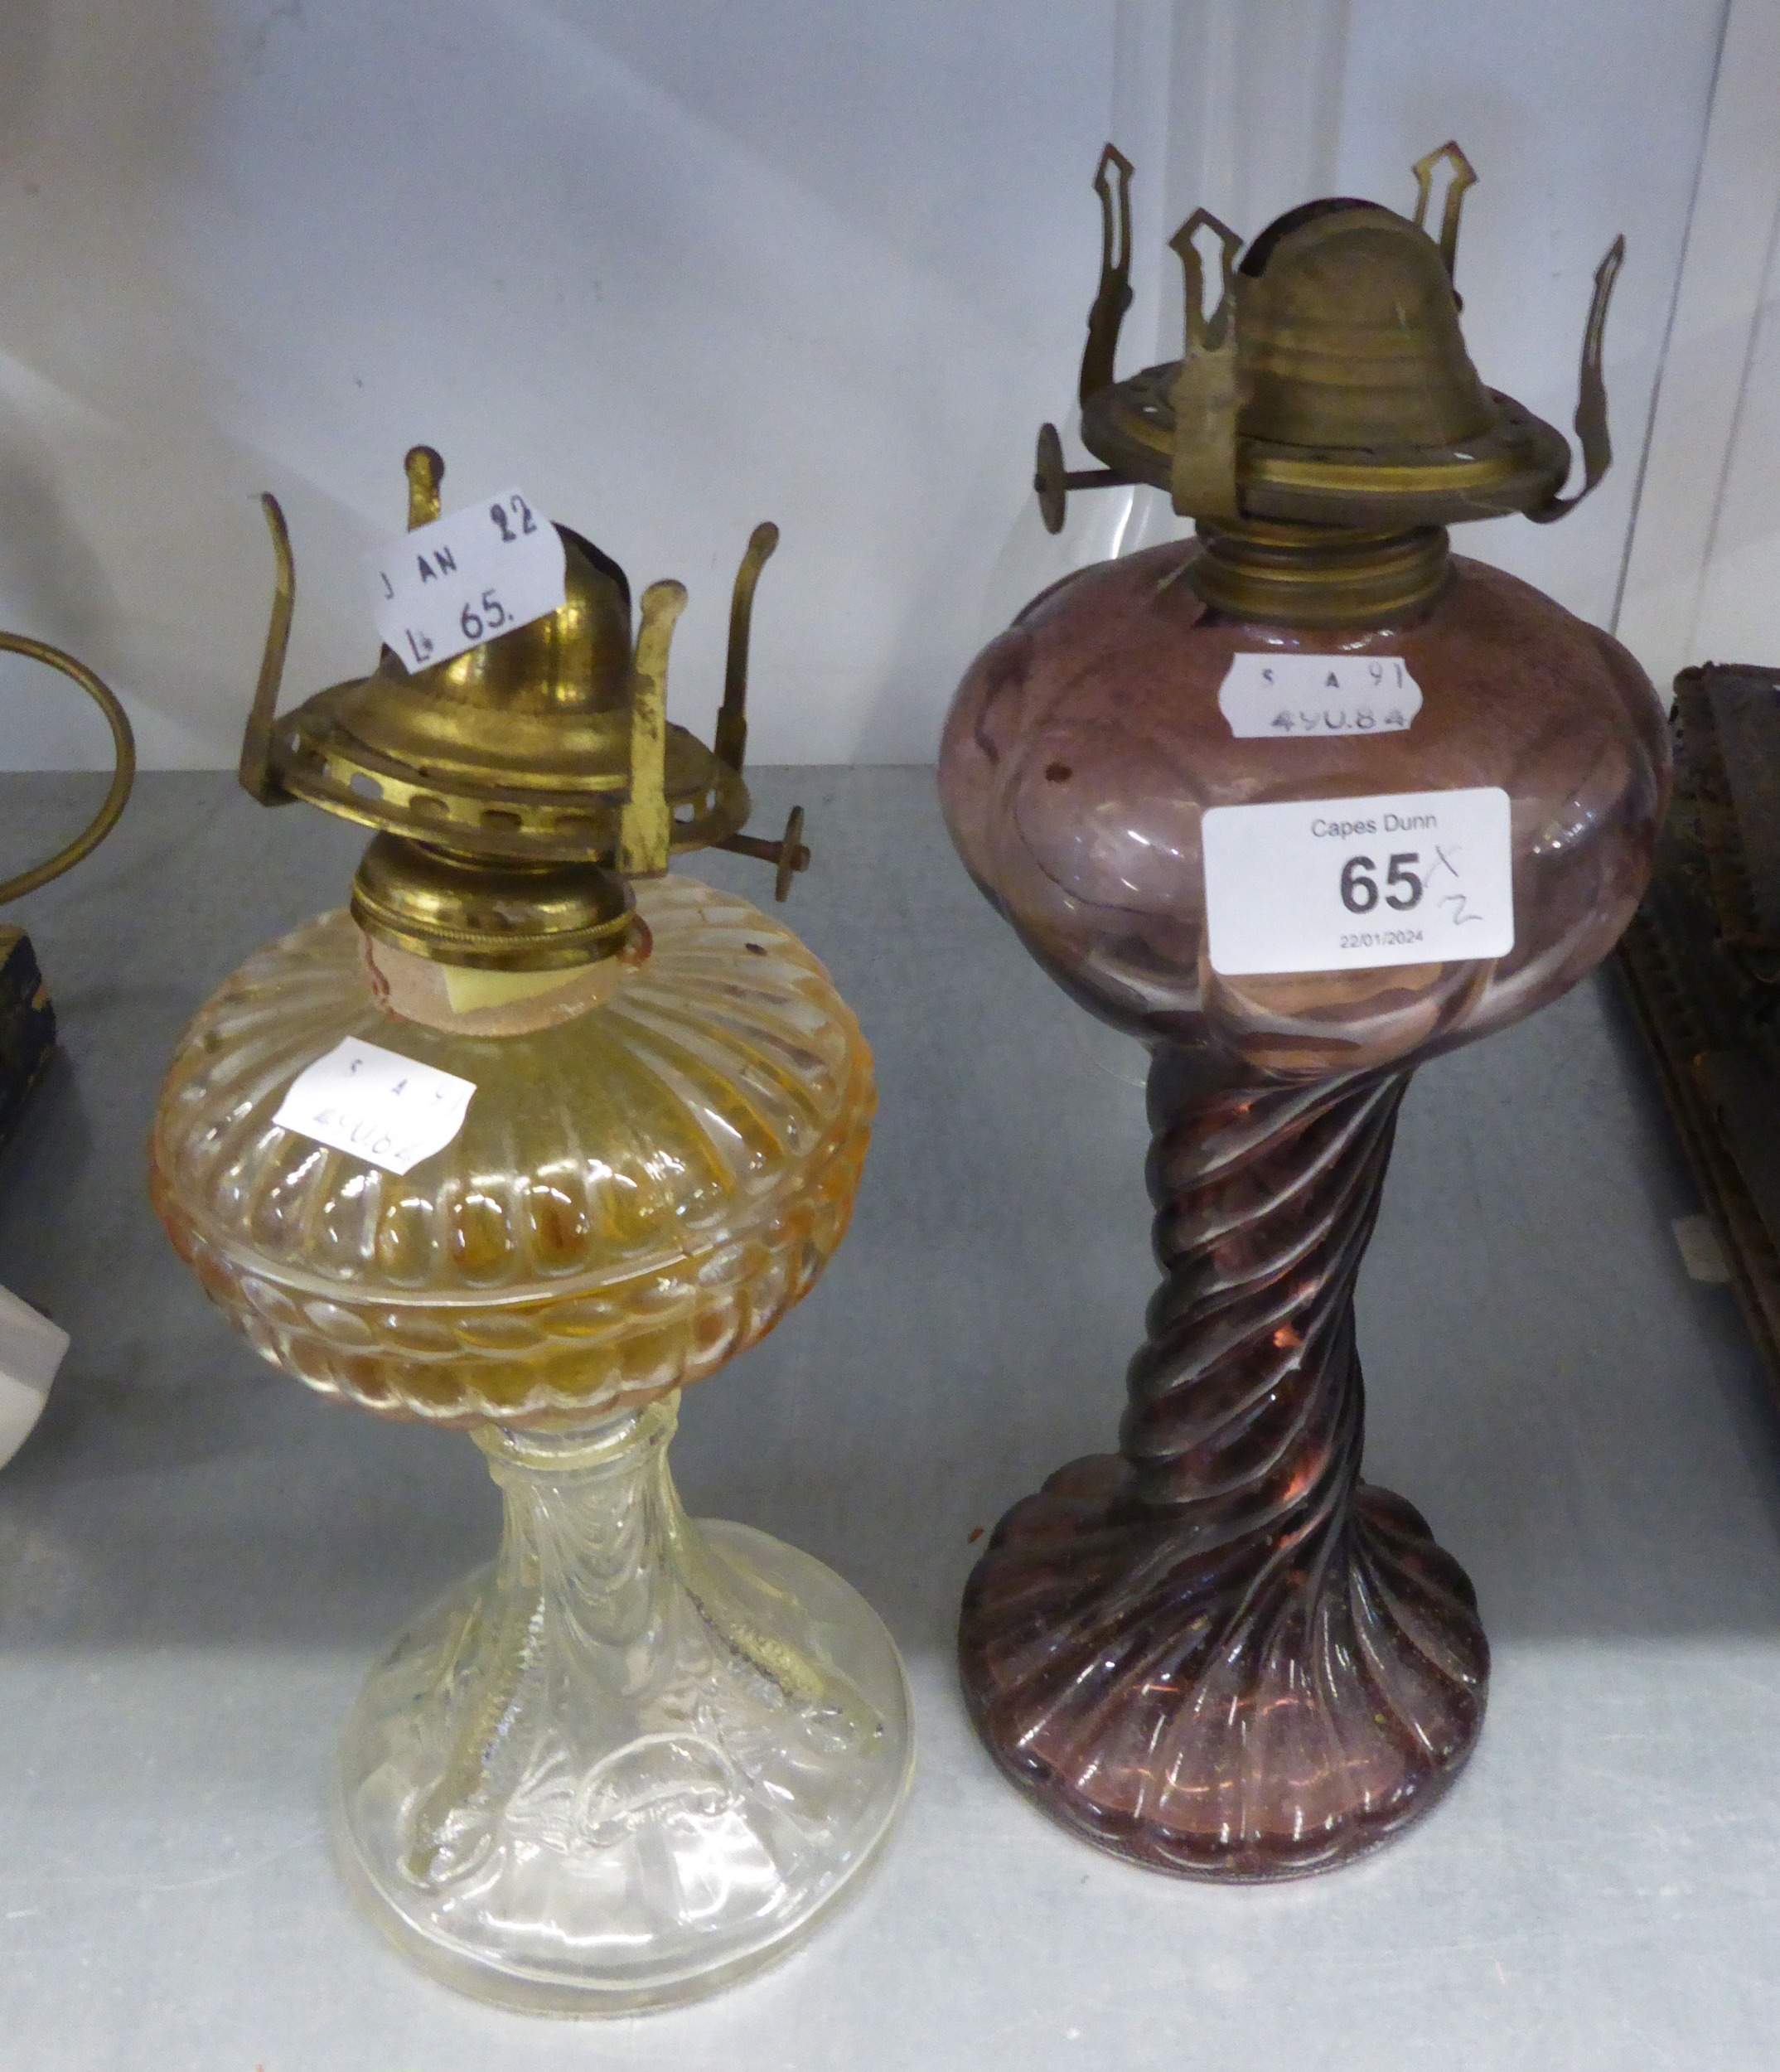 TWO SPIRALLY FLUTED GLASS OIL TABLE LAMPS AND THE GLASS FINIALS